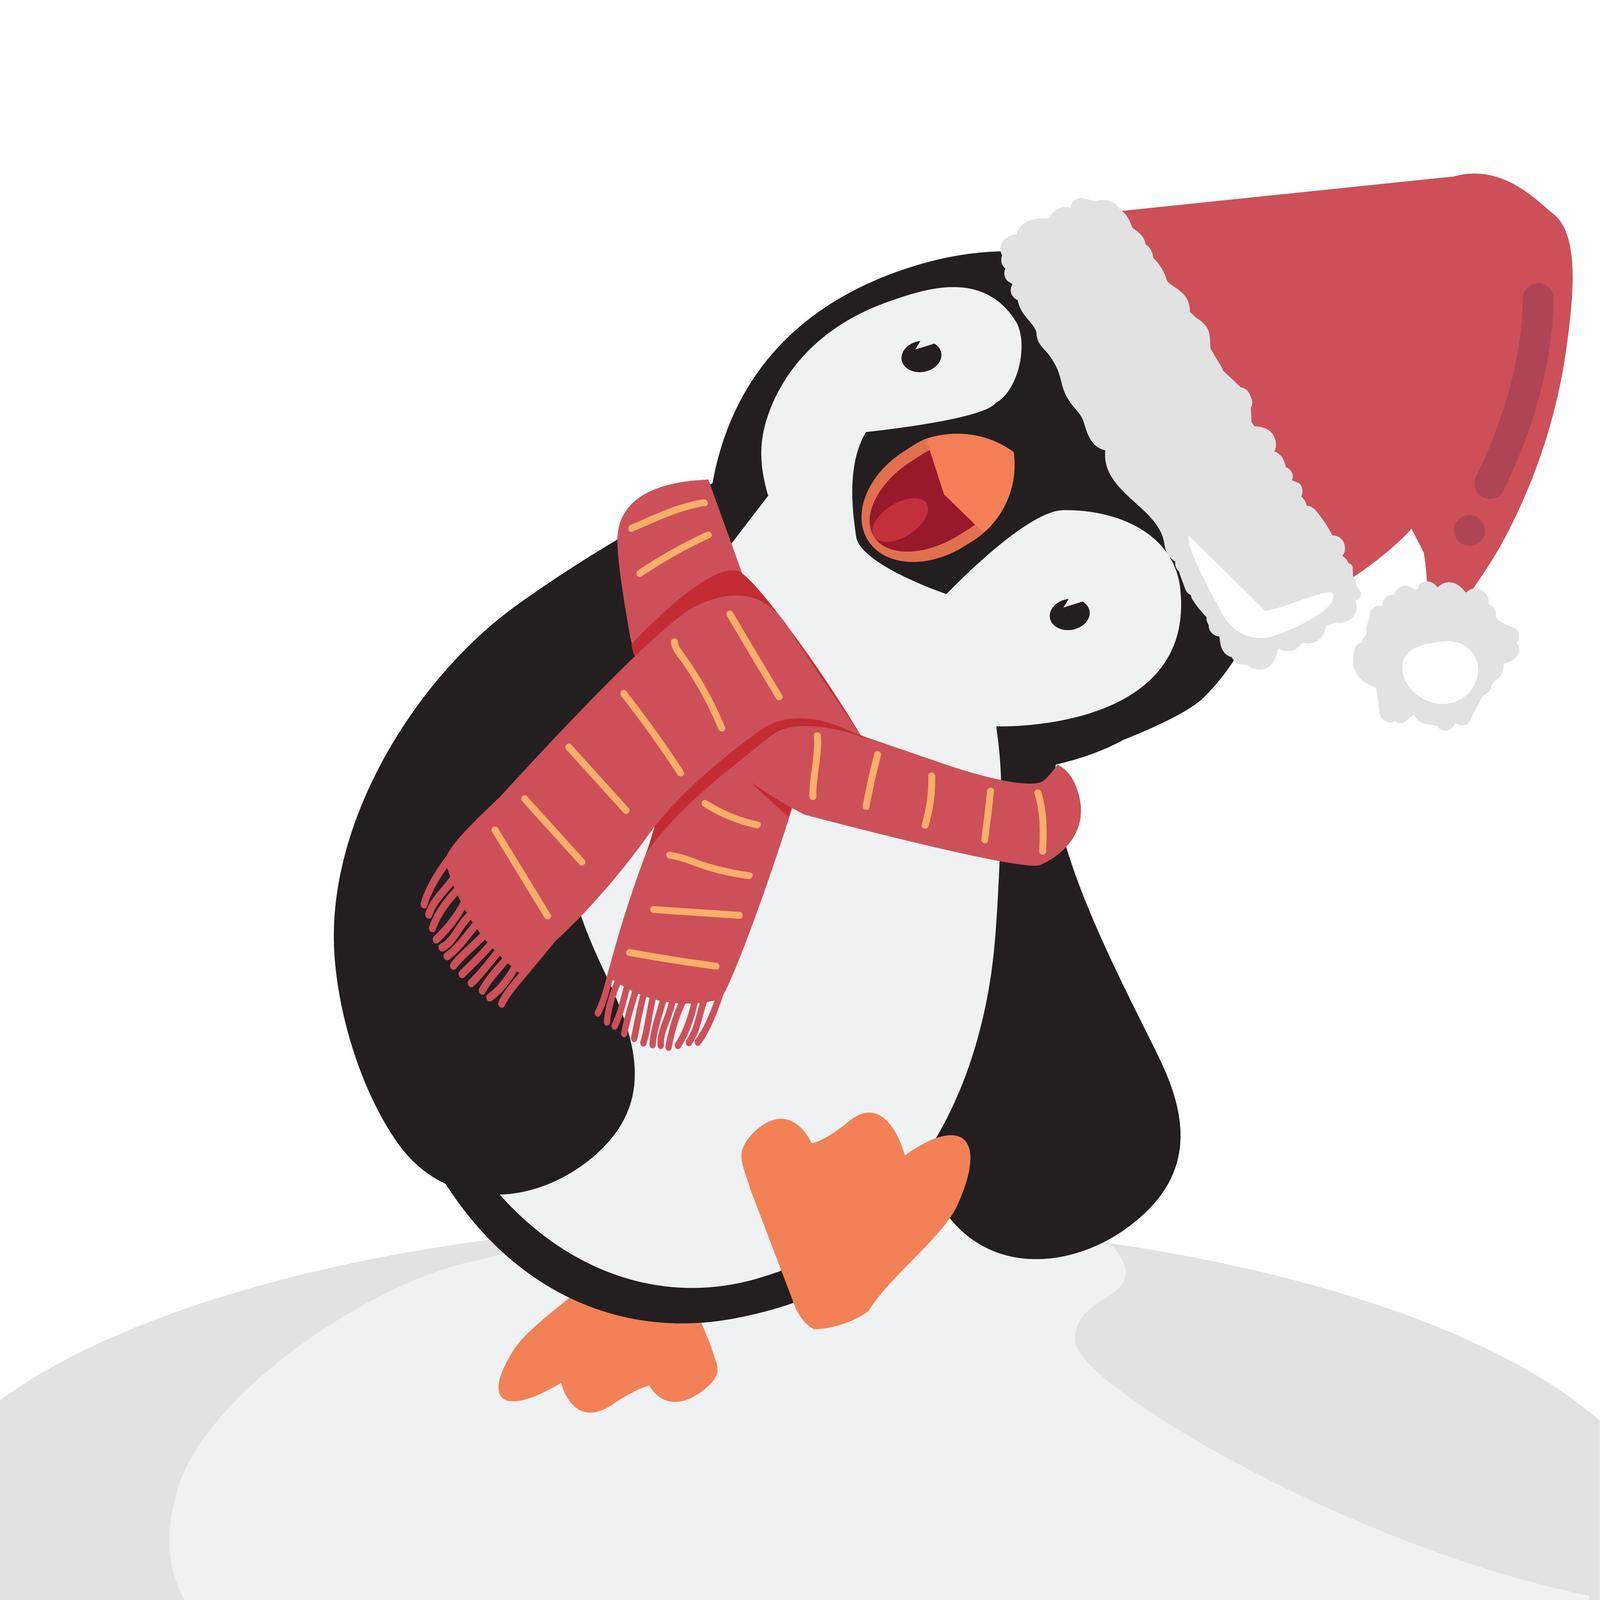 Cute penguin in hat and scarf cartoon